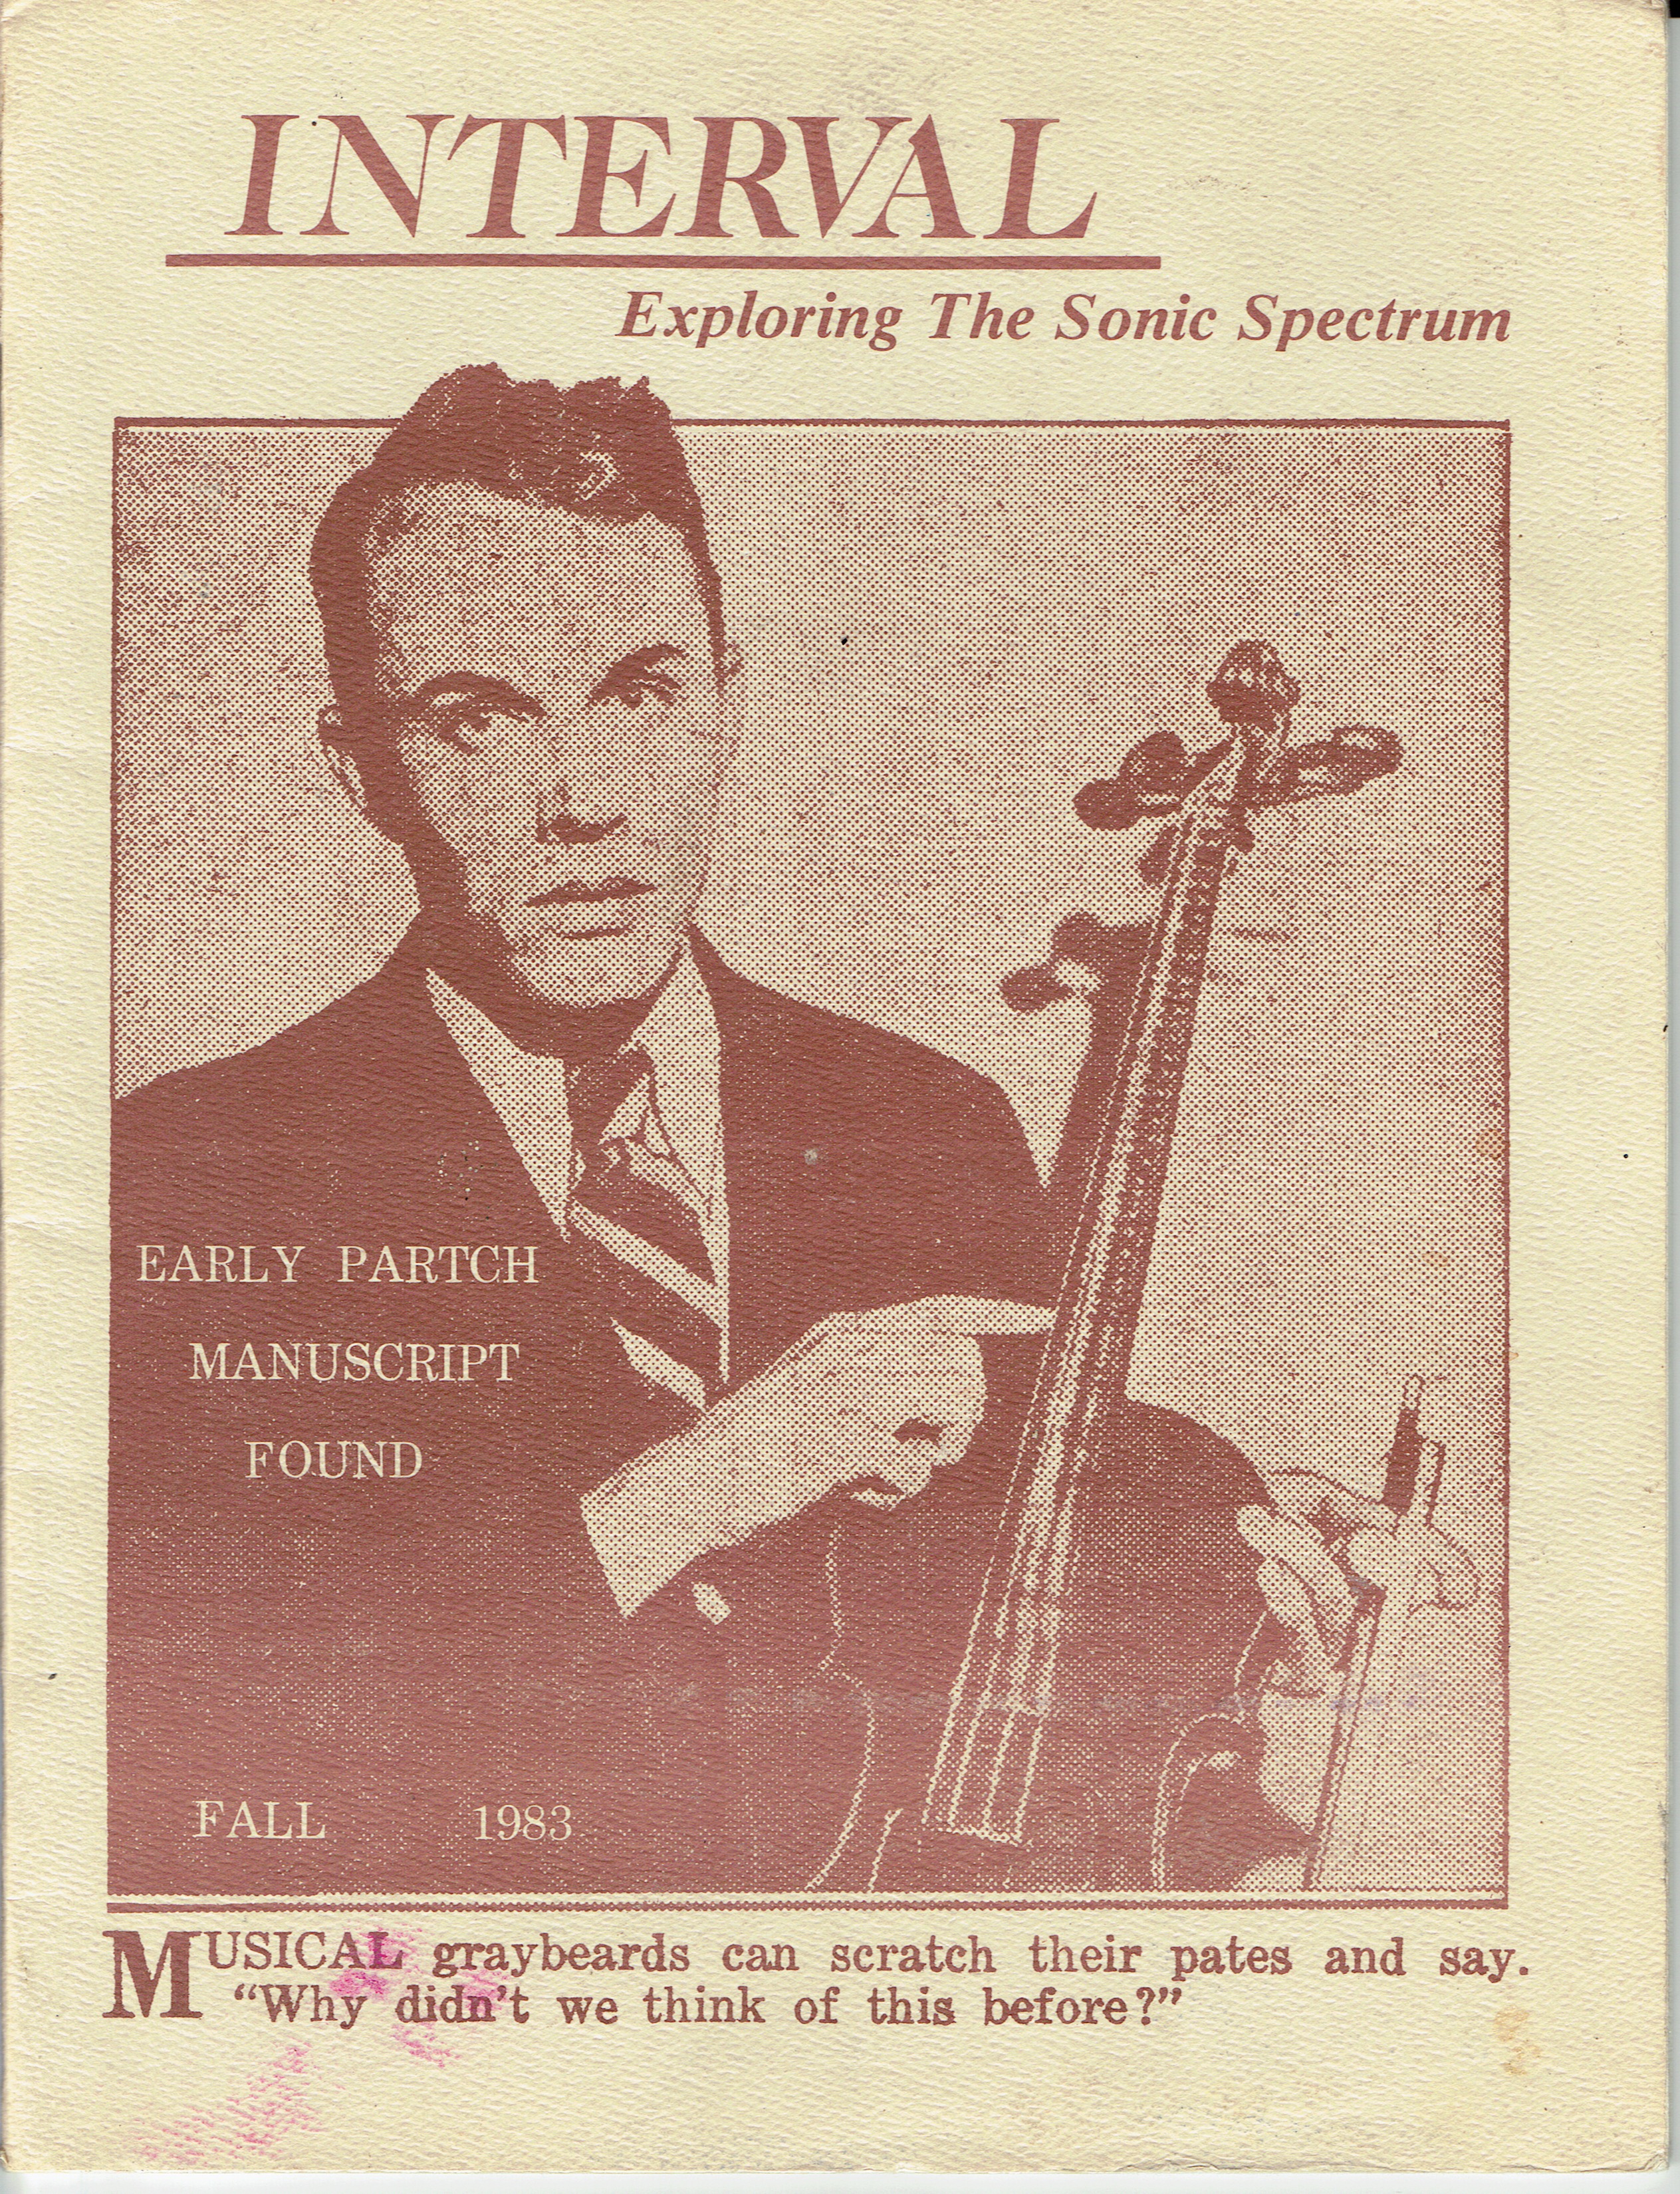 Harry Partch — 1932 - 
From unidentified newspaper article